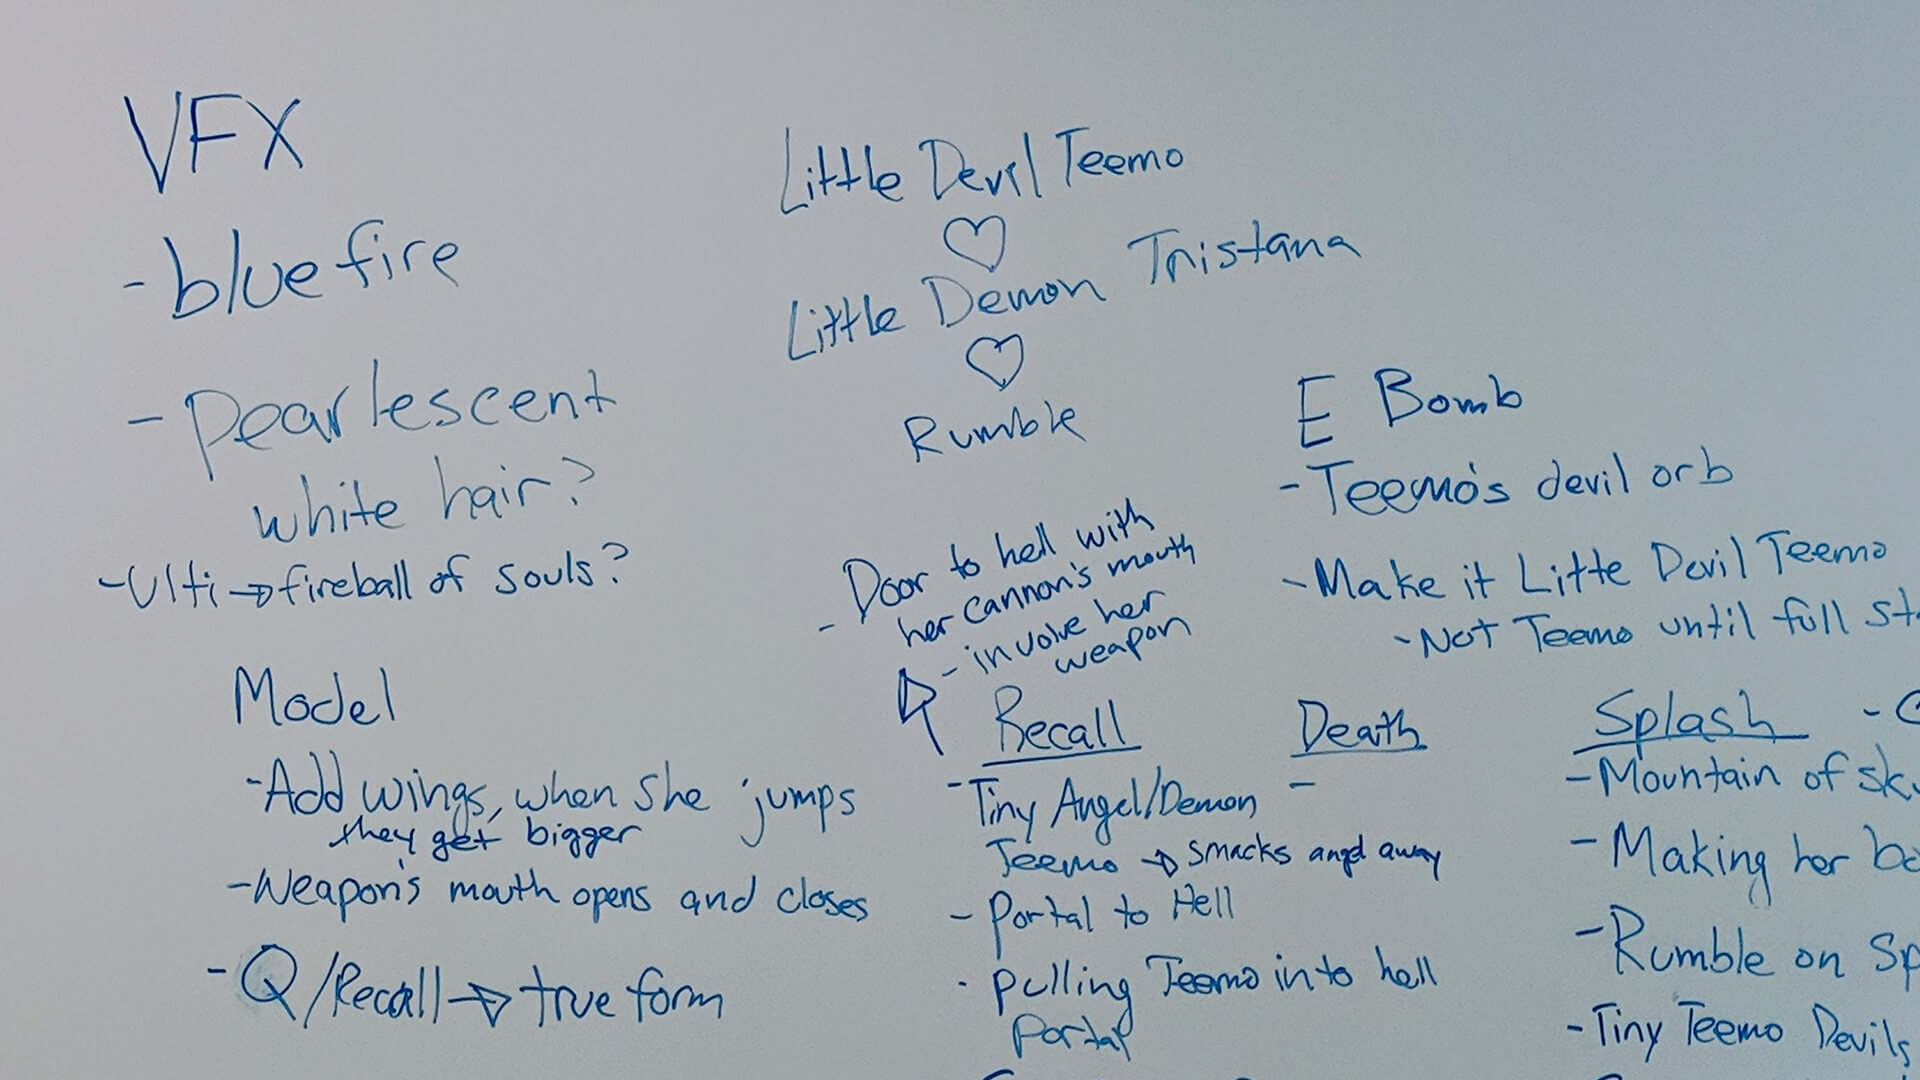 White board from the blue sky meeting. It’s possible none of these things make it into the game—it’s just an early brainstorm!